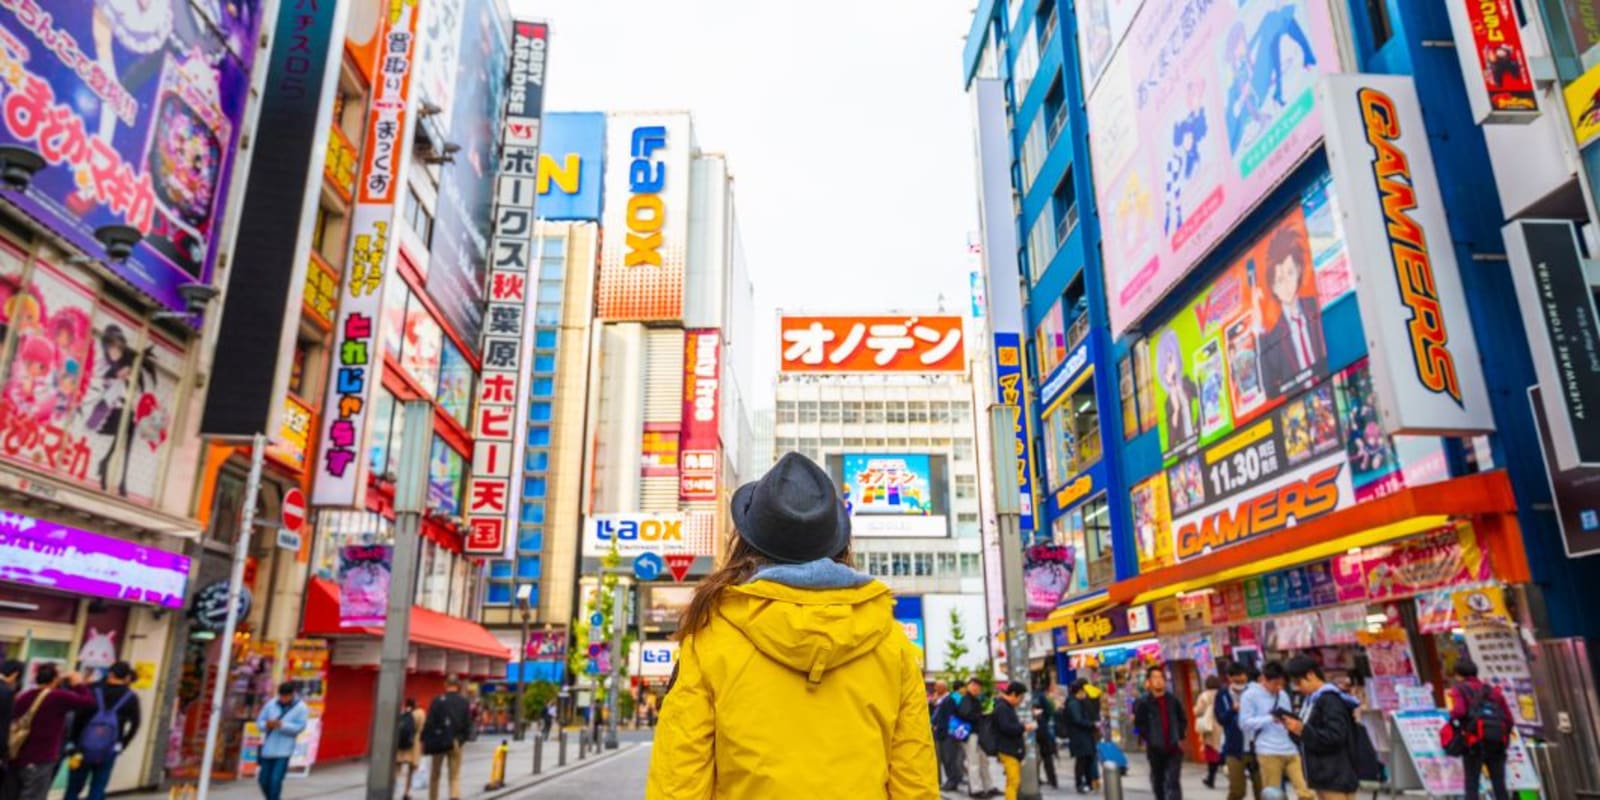 A traveller exploring Tokyo for the first time